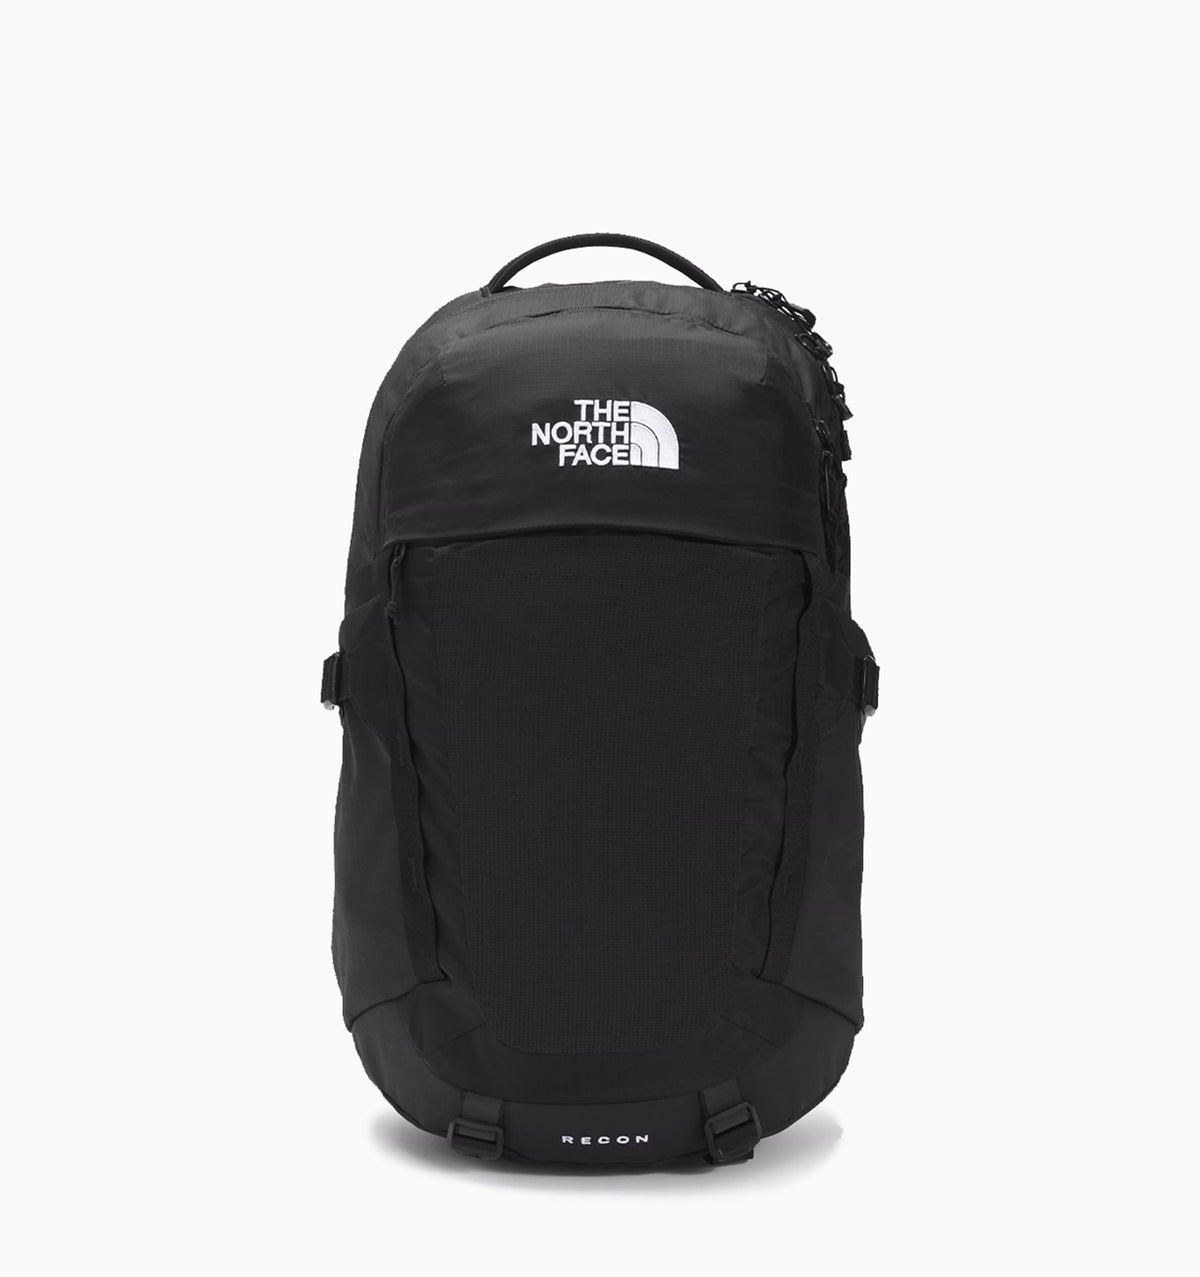 The North Face Recon 16" Laptop Backpack 31L - 2022 Edition - Black